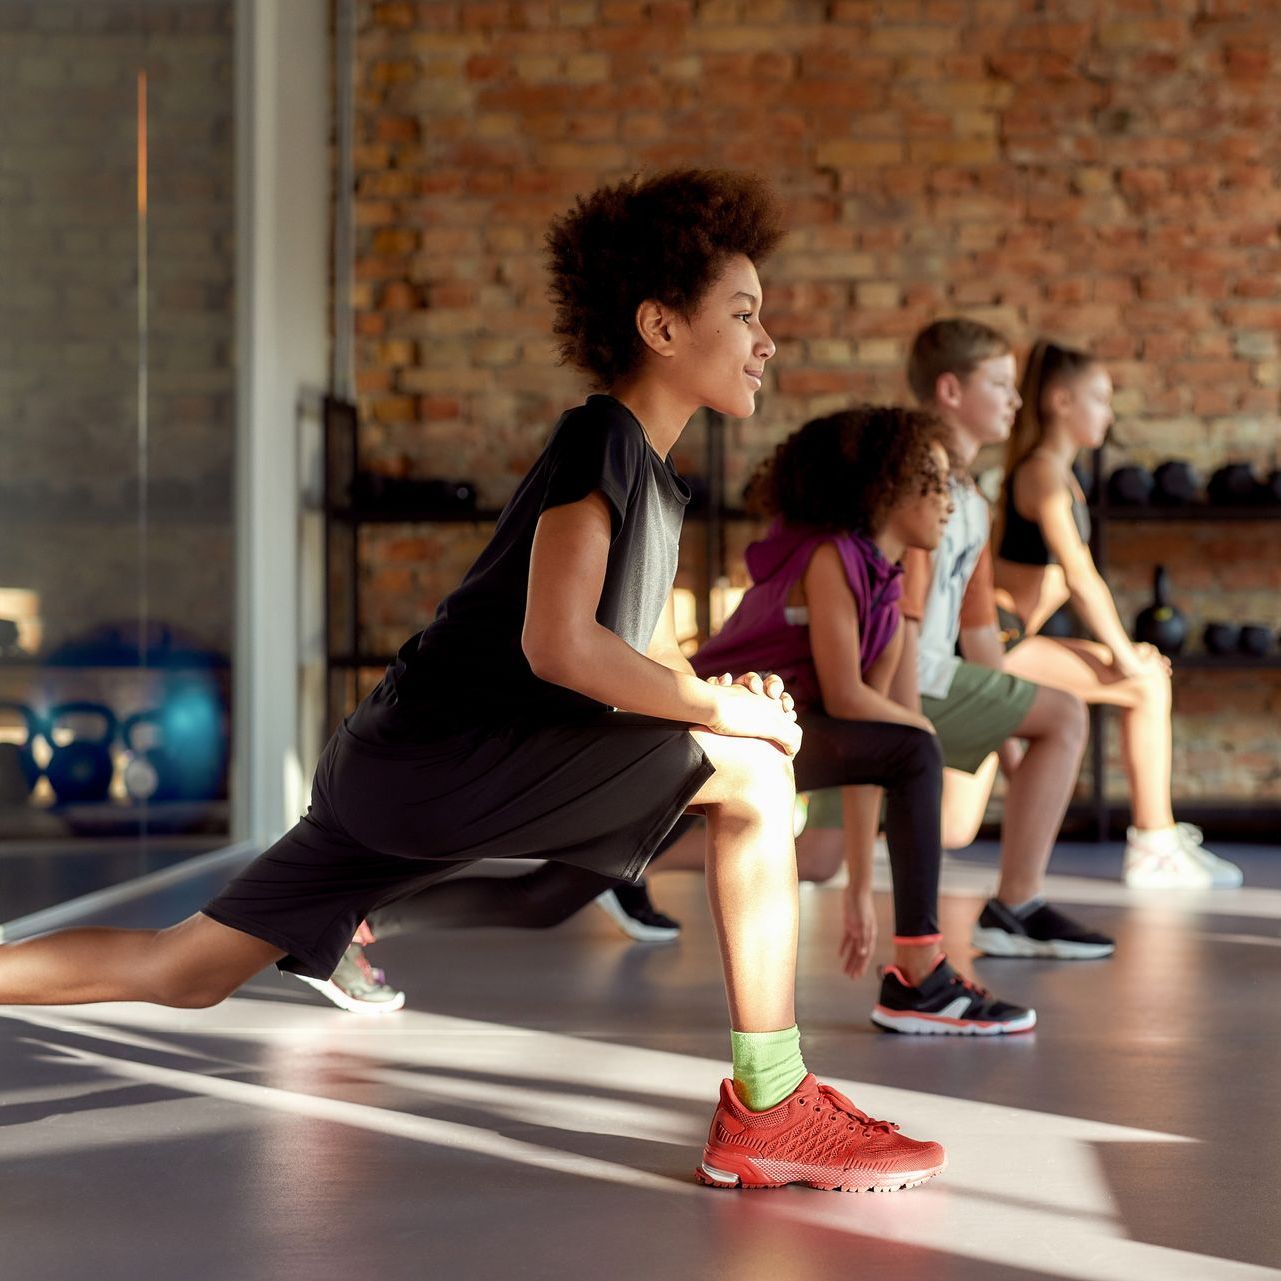 Image of adolescents at the gym exercising together.